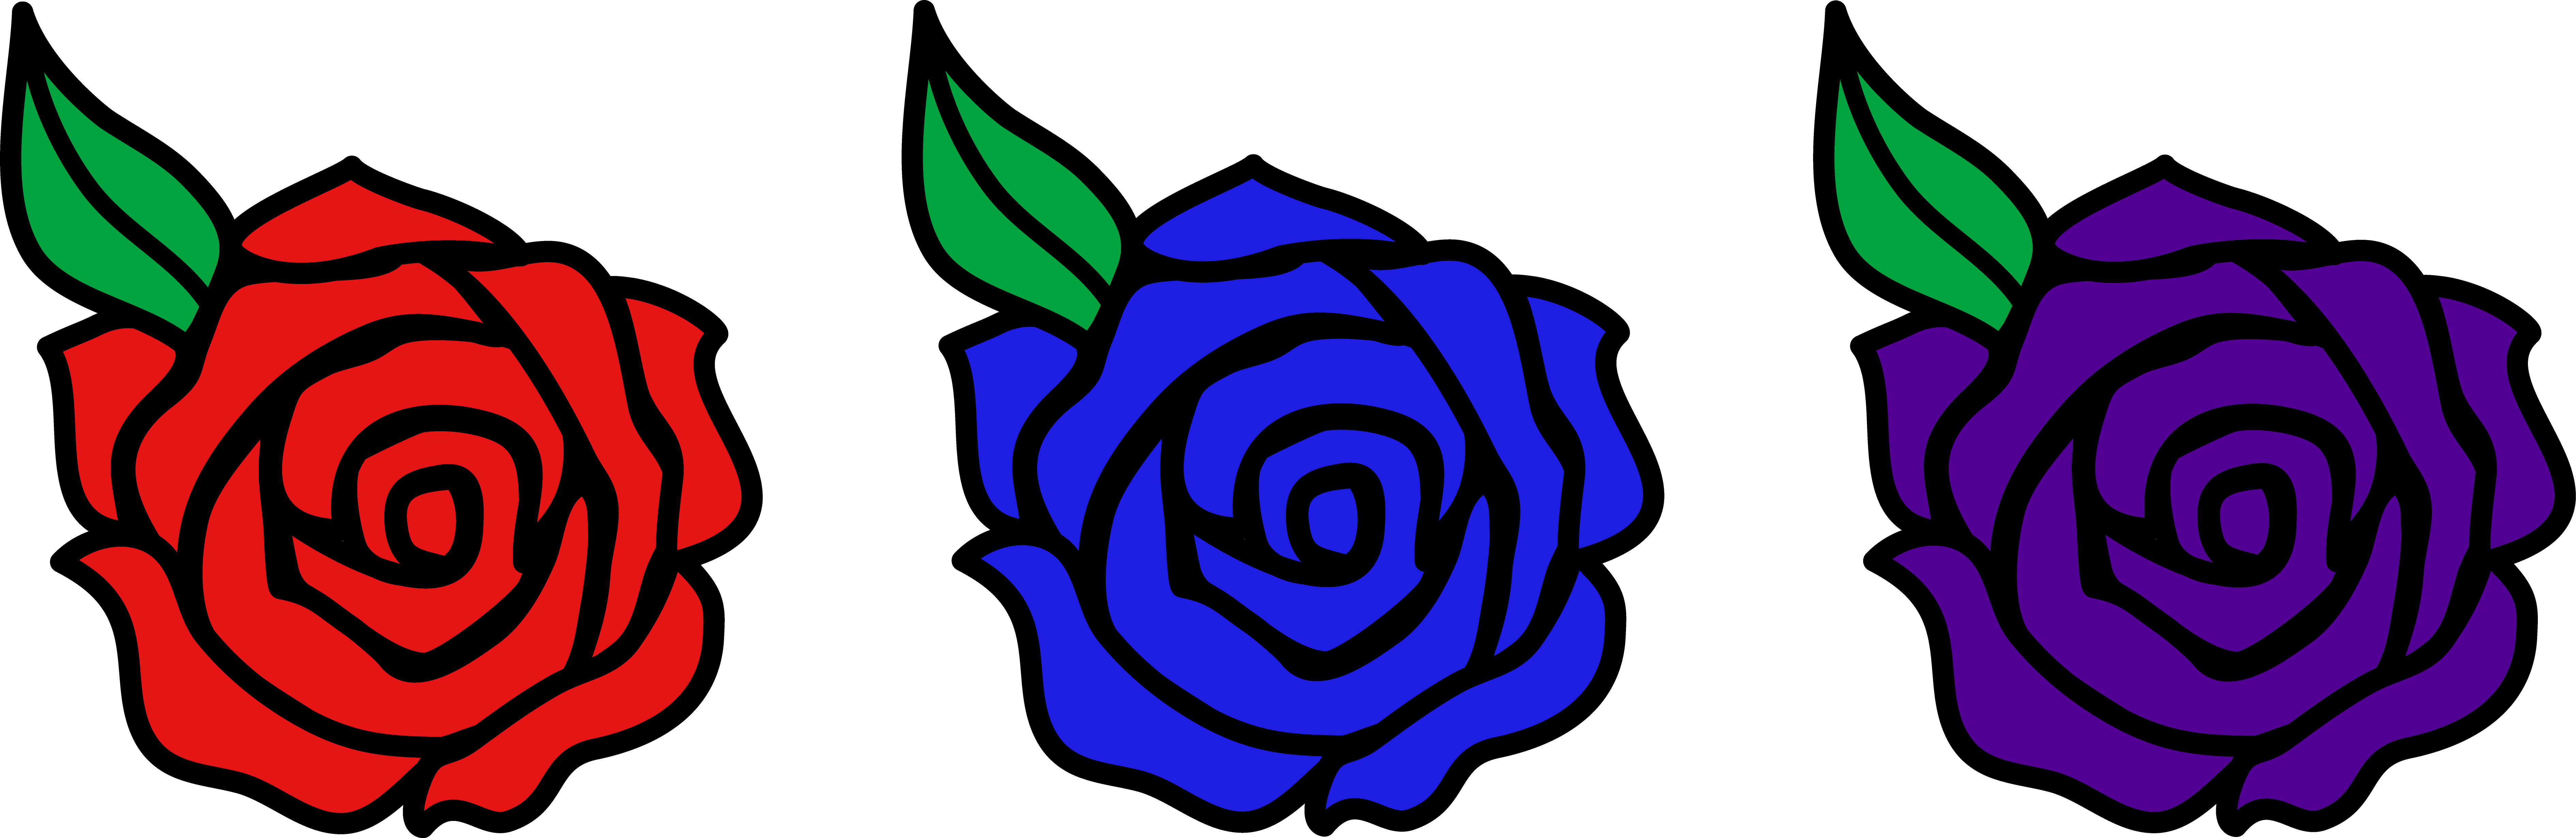 Red Blue and Violet Roses - Free Clip Art